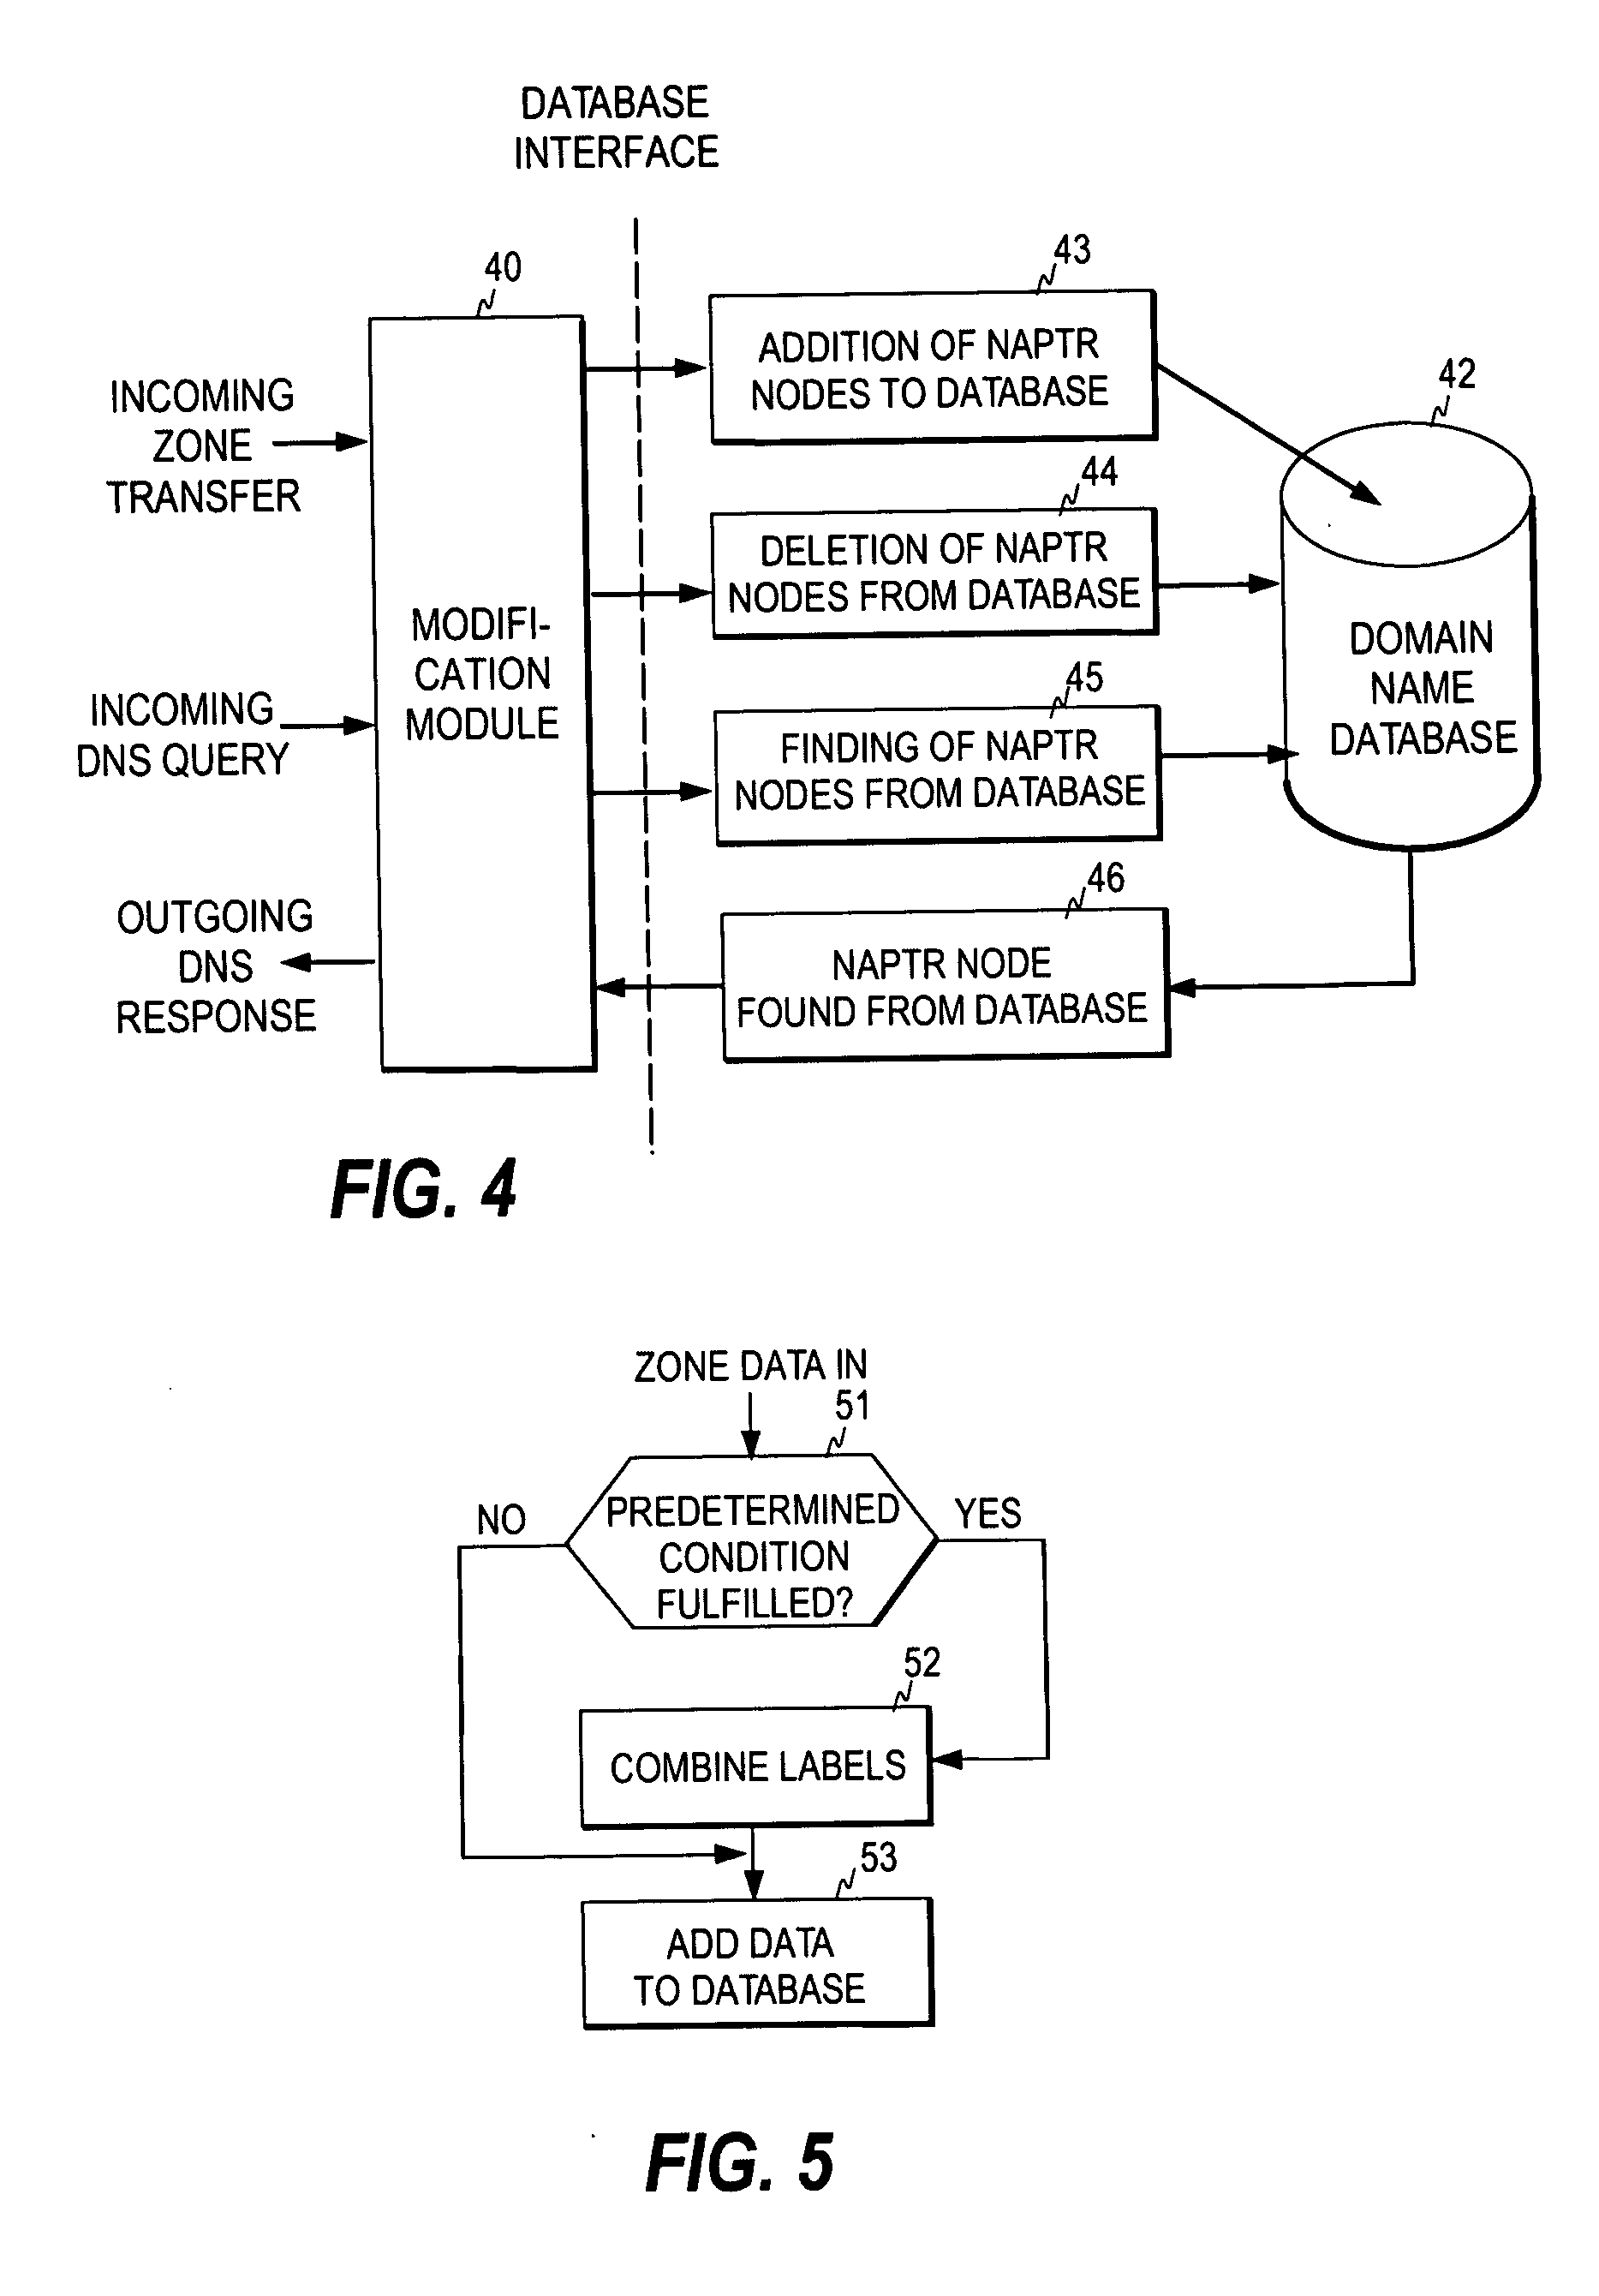 Enhancement of database performance in a Domain Name System